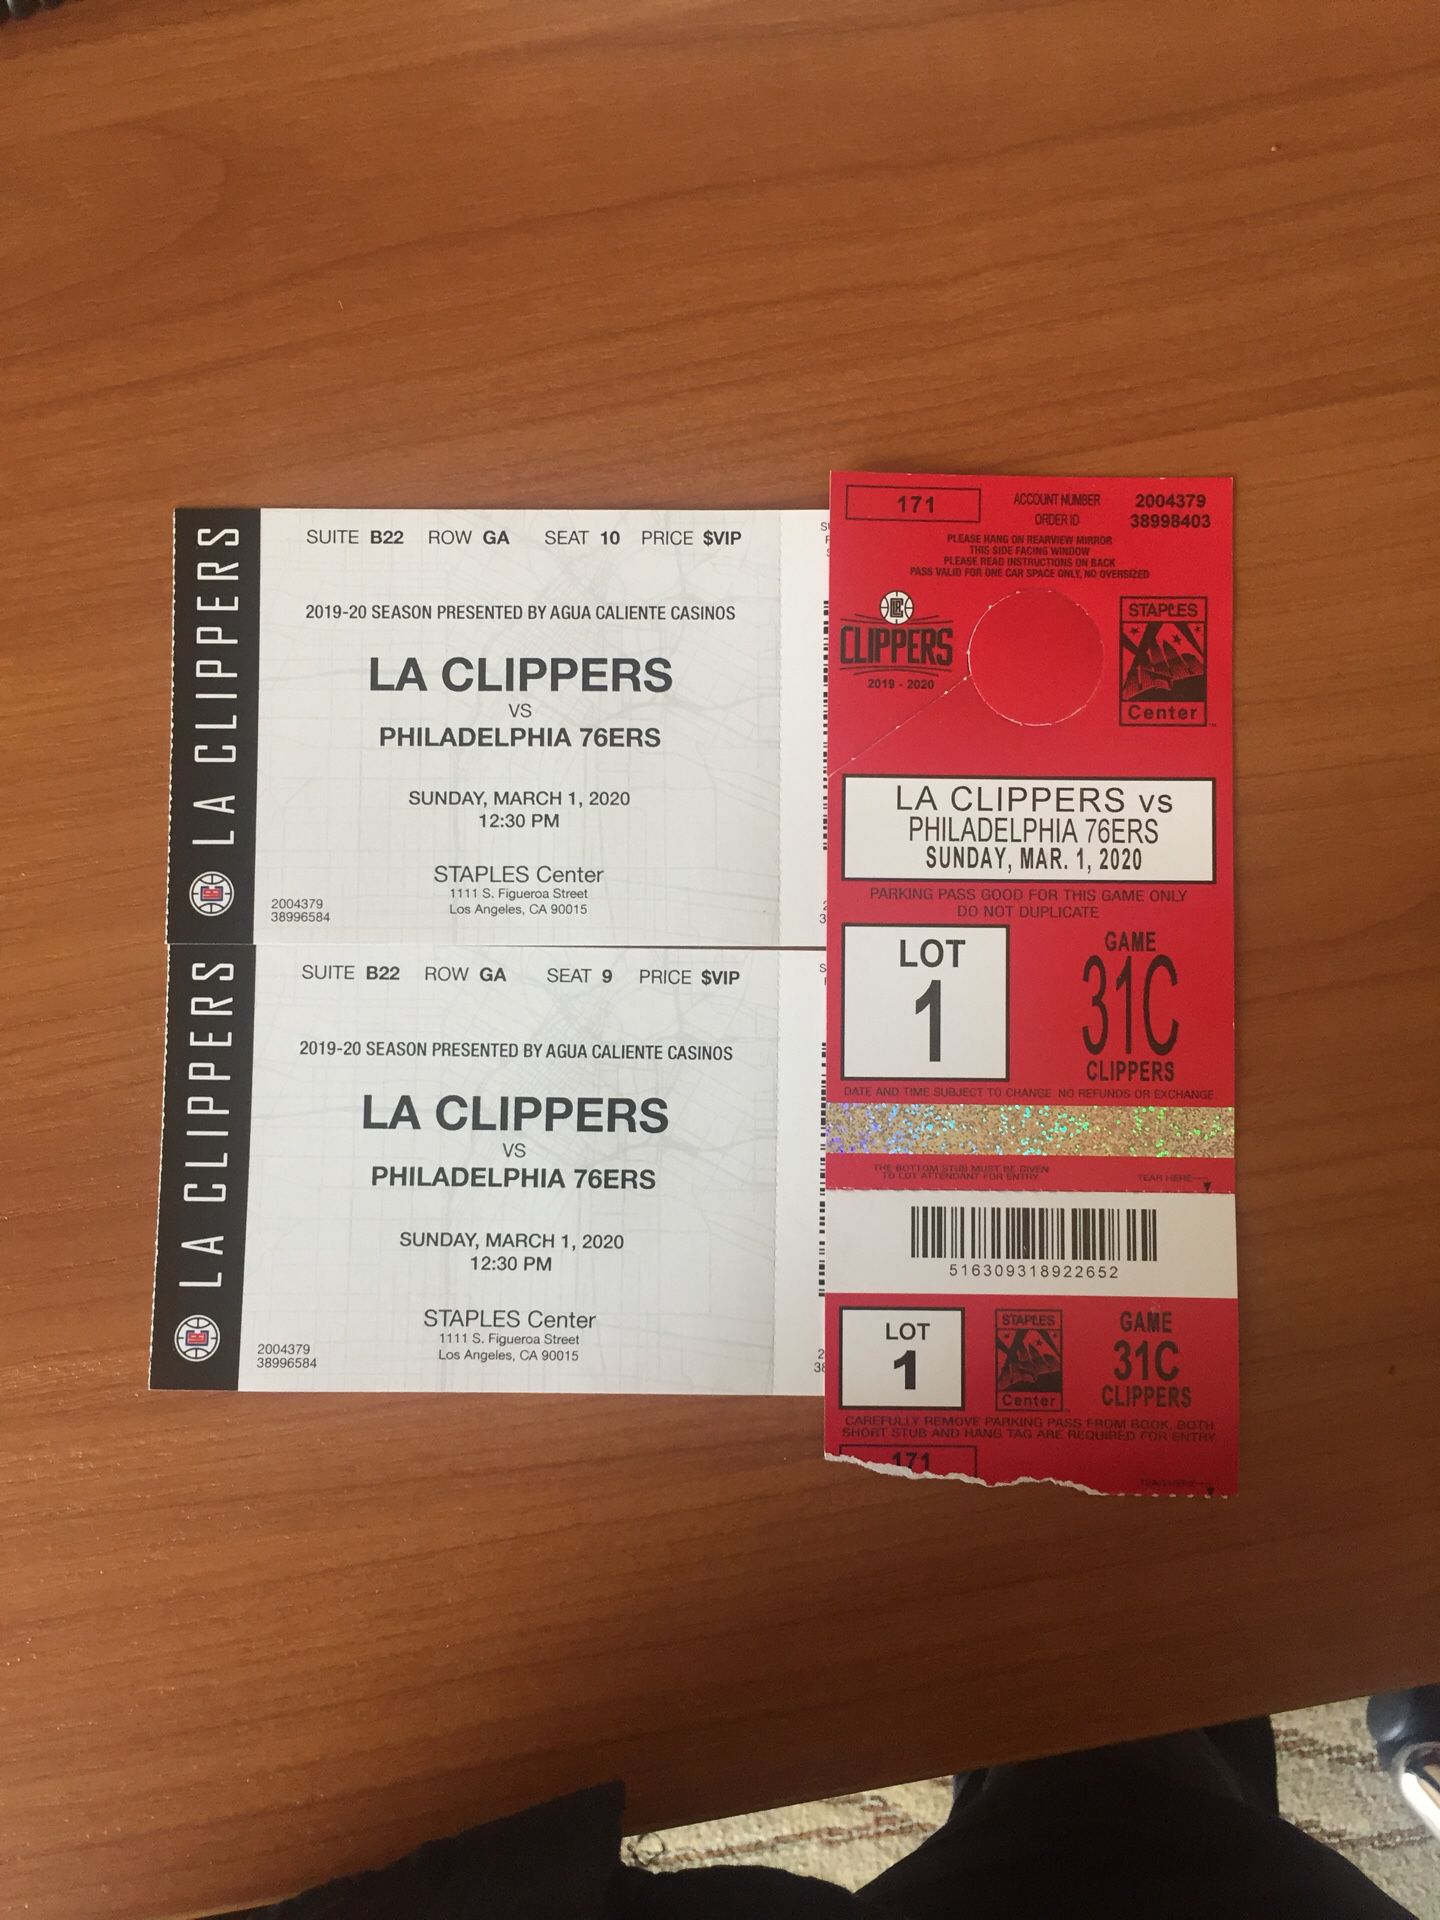 VIP Clippers vs. 76ers Suite Box tickets plus VIP Parking